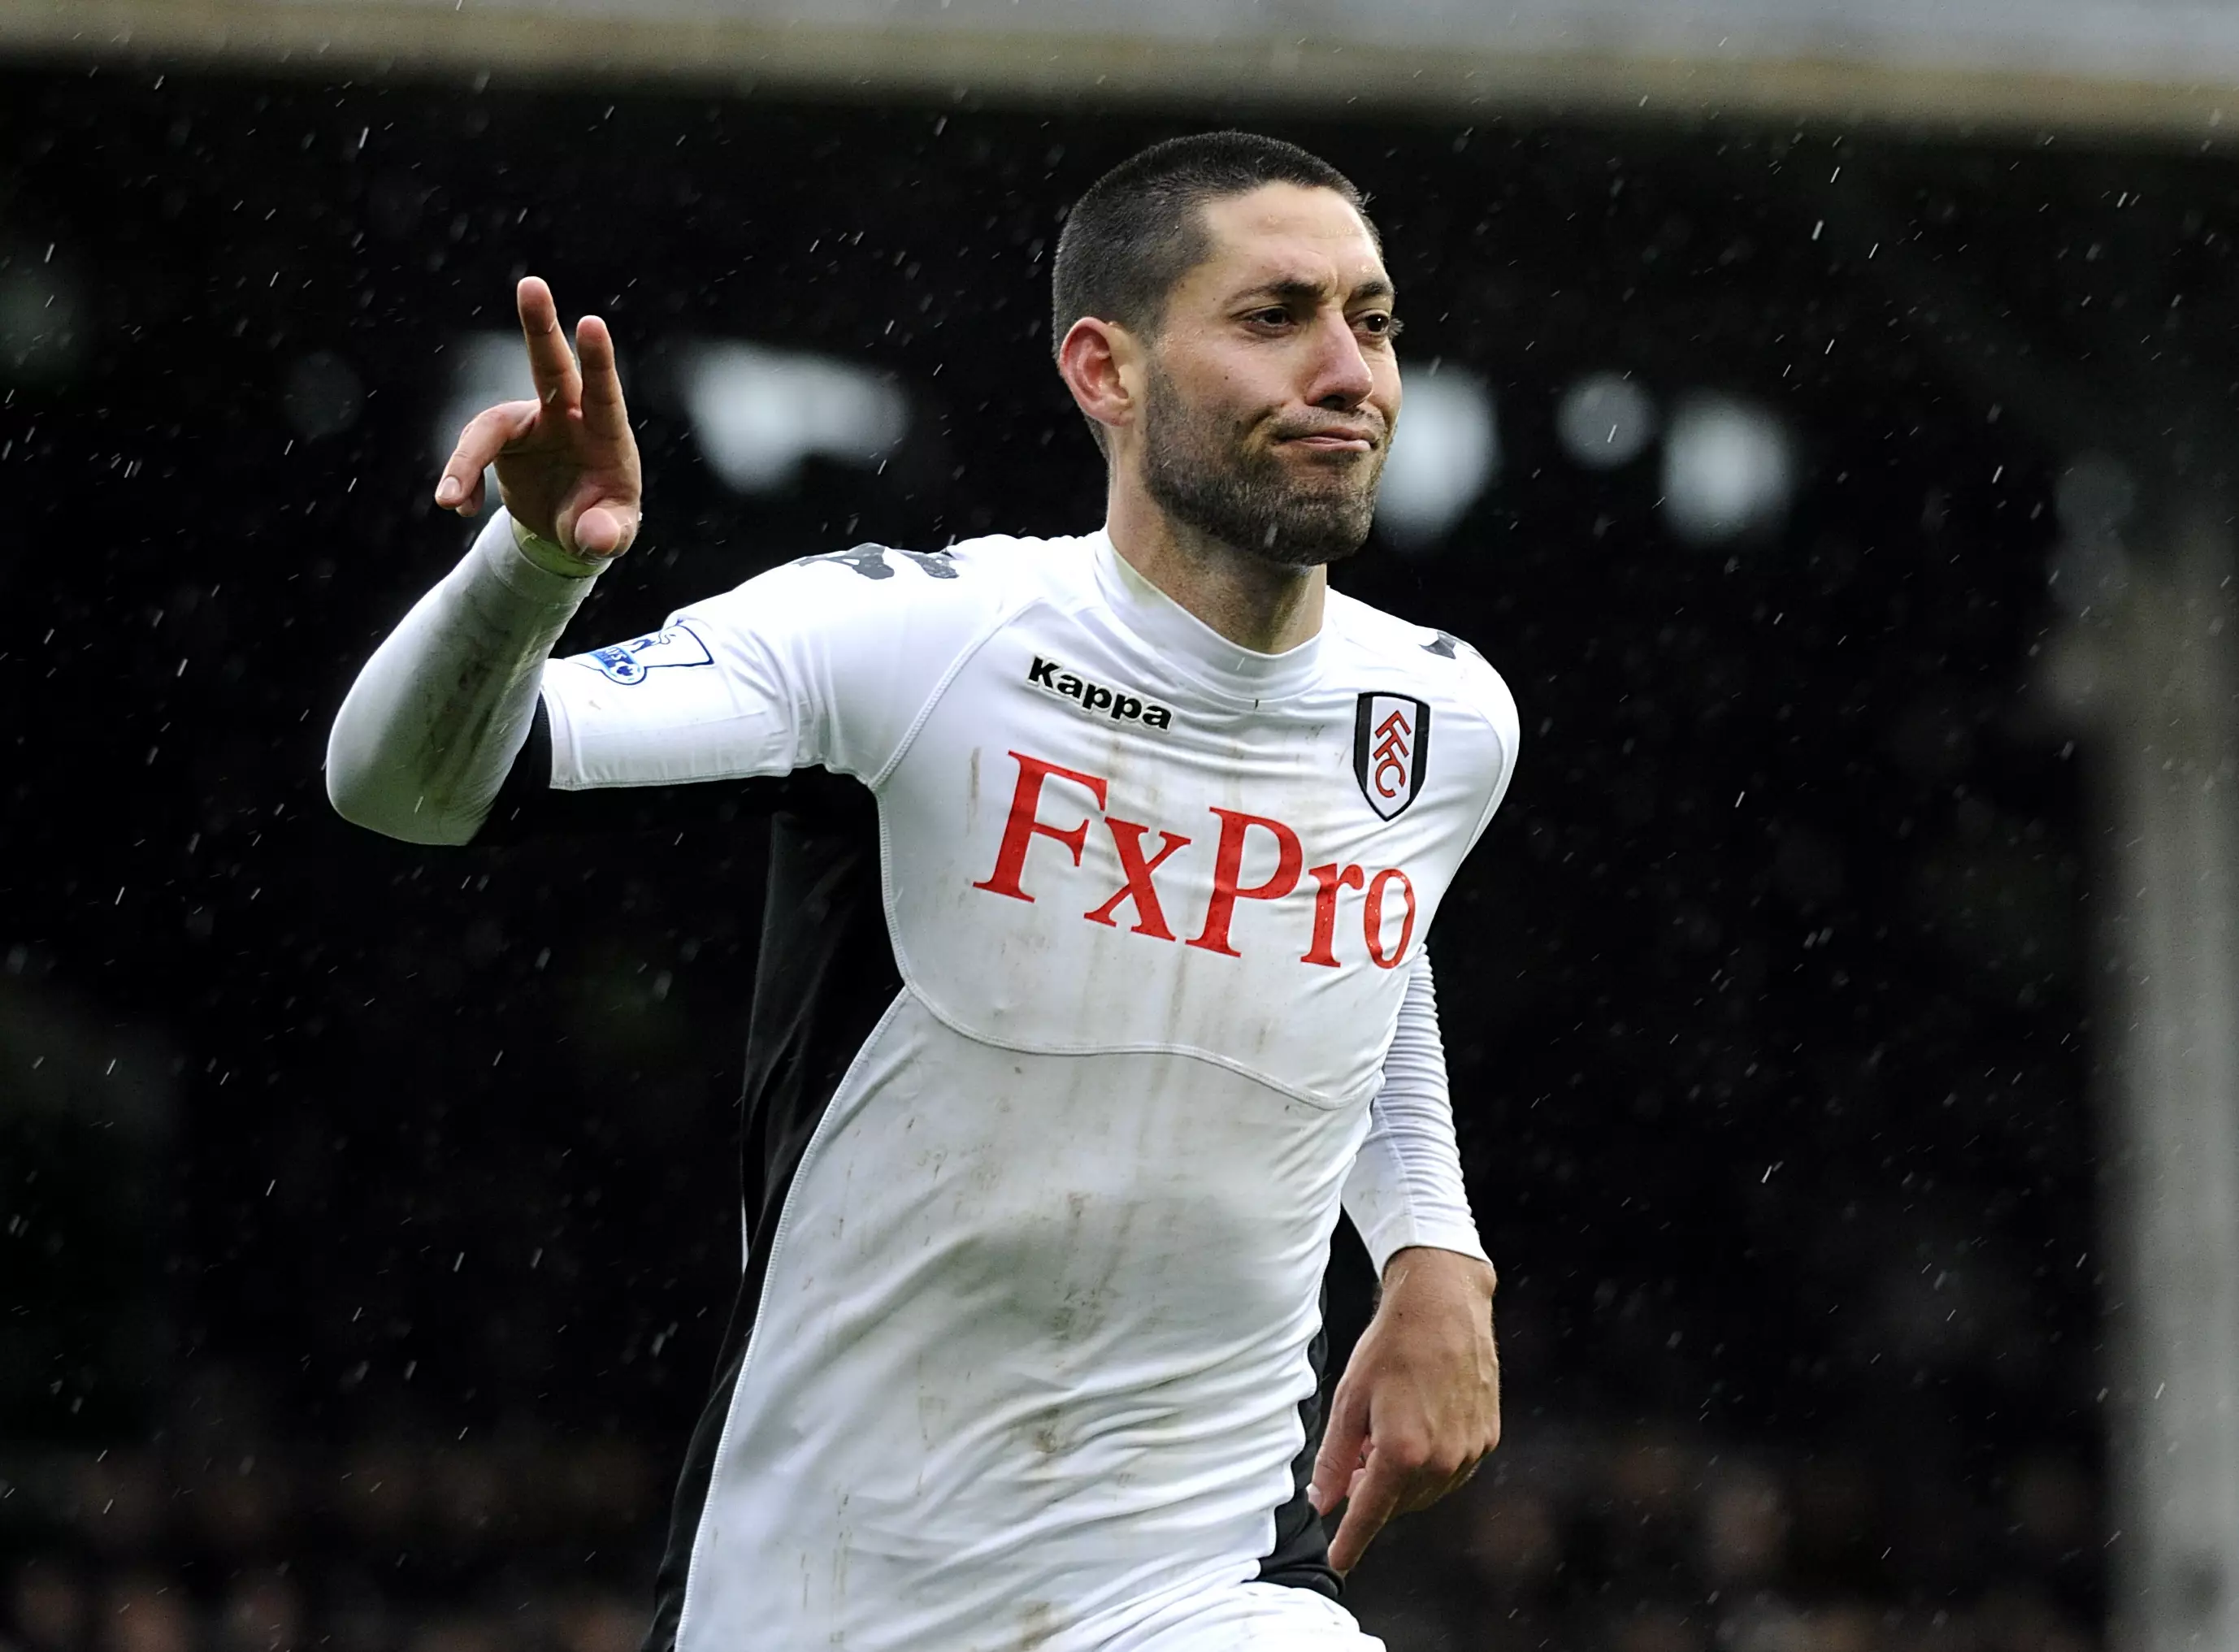 Dempsey's form earned him a move to Spurs but he could have been at Liverpool. Image: PA Images